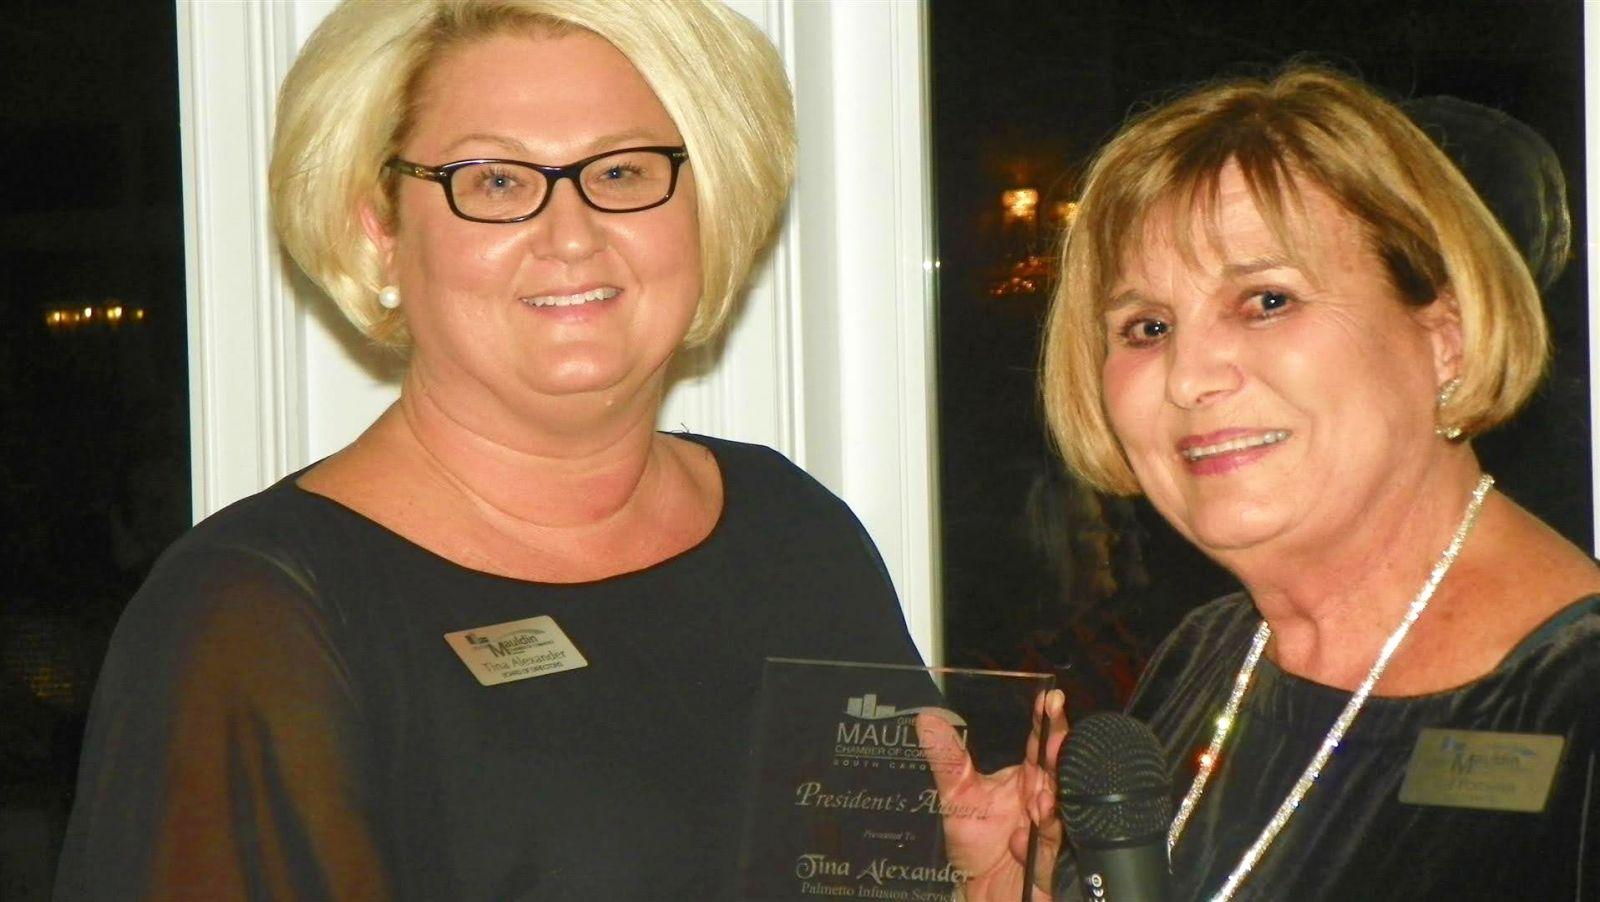 Tina Alexander of Palmetto Infusion Services was presented with the President‰Ûªs Award by chamber CEO Pat Pomeroy. (Photo/Provided)